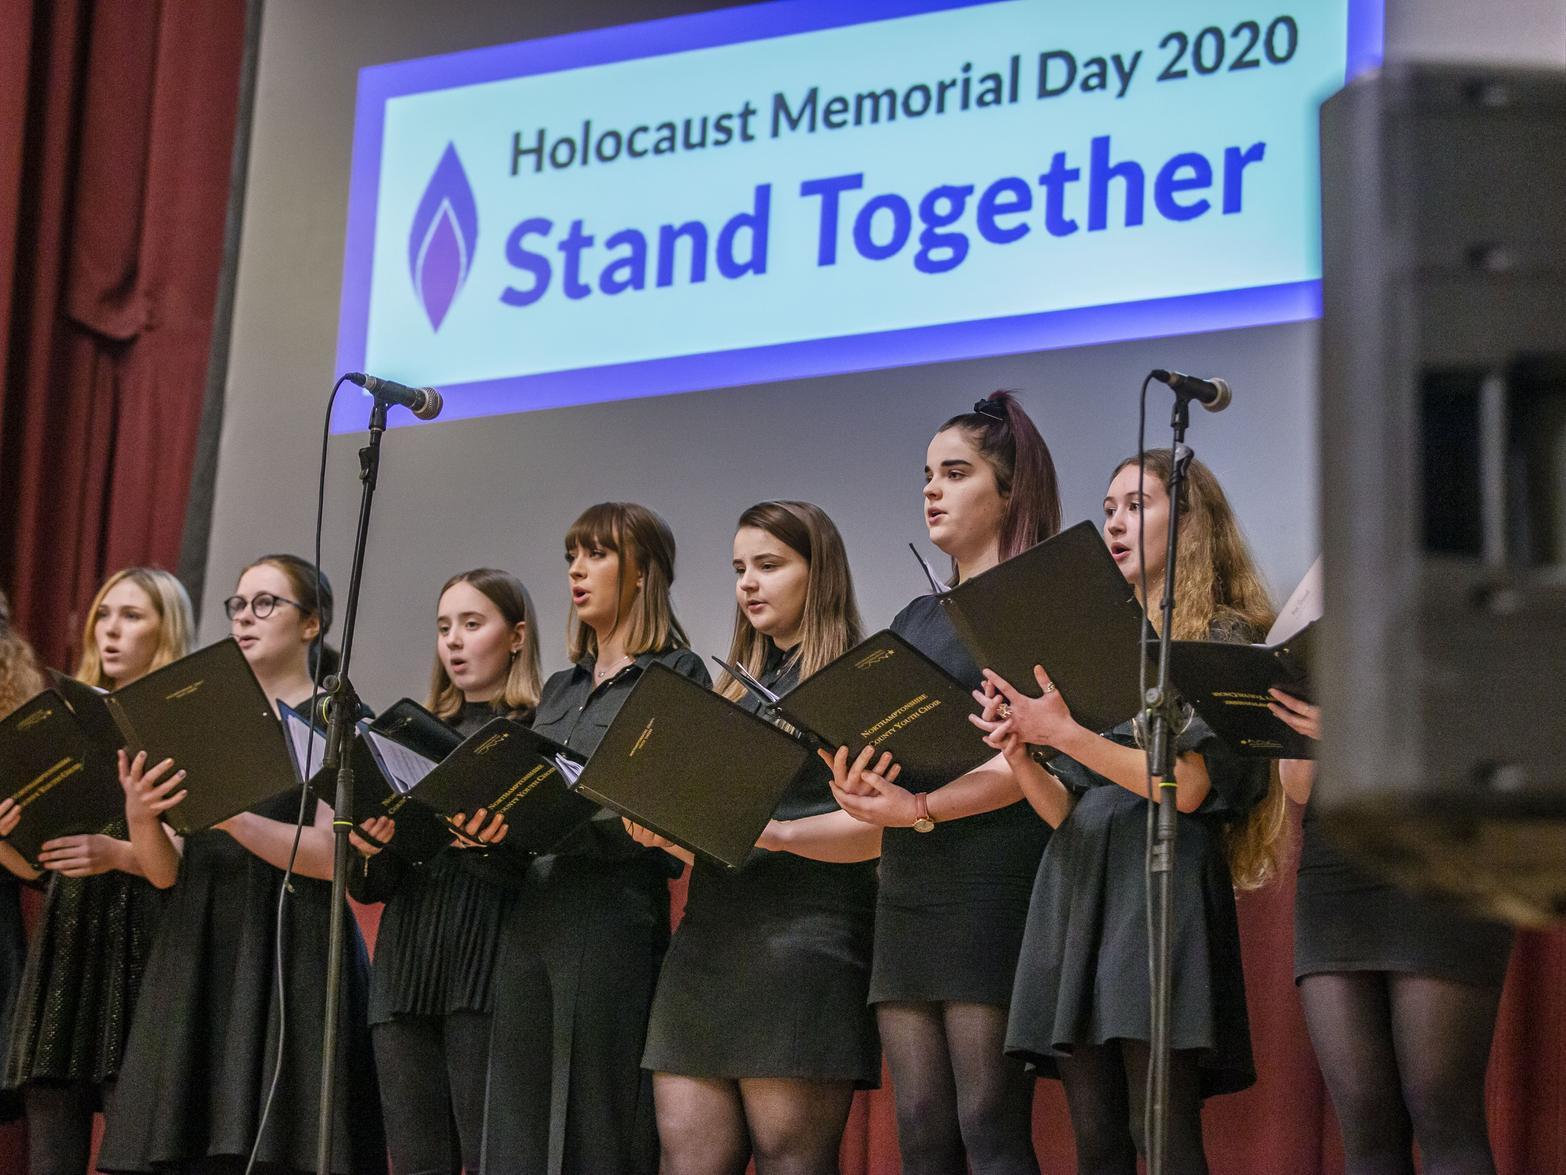 The Northamptonshire Music and Performing Arts Trust's Community Choir sing at the Holocaust Memorial Day service